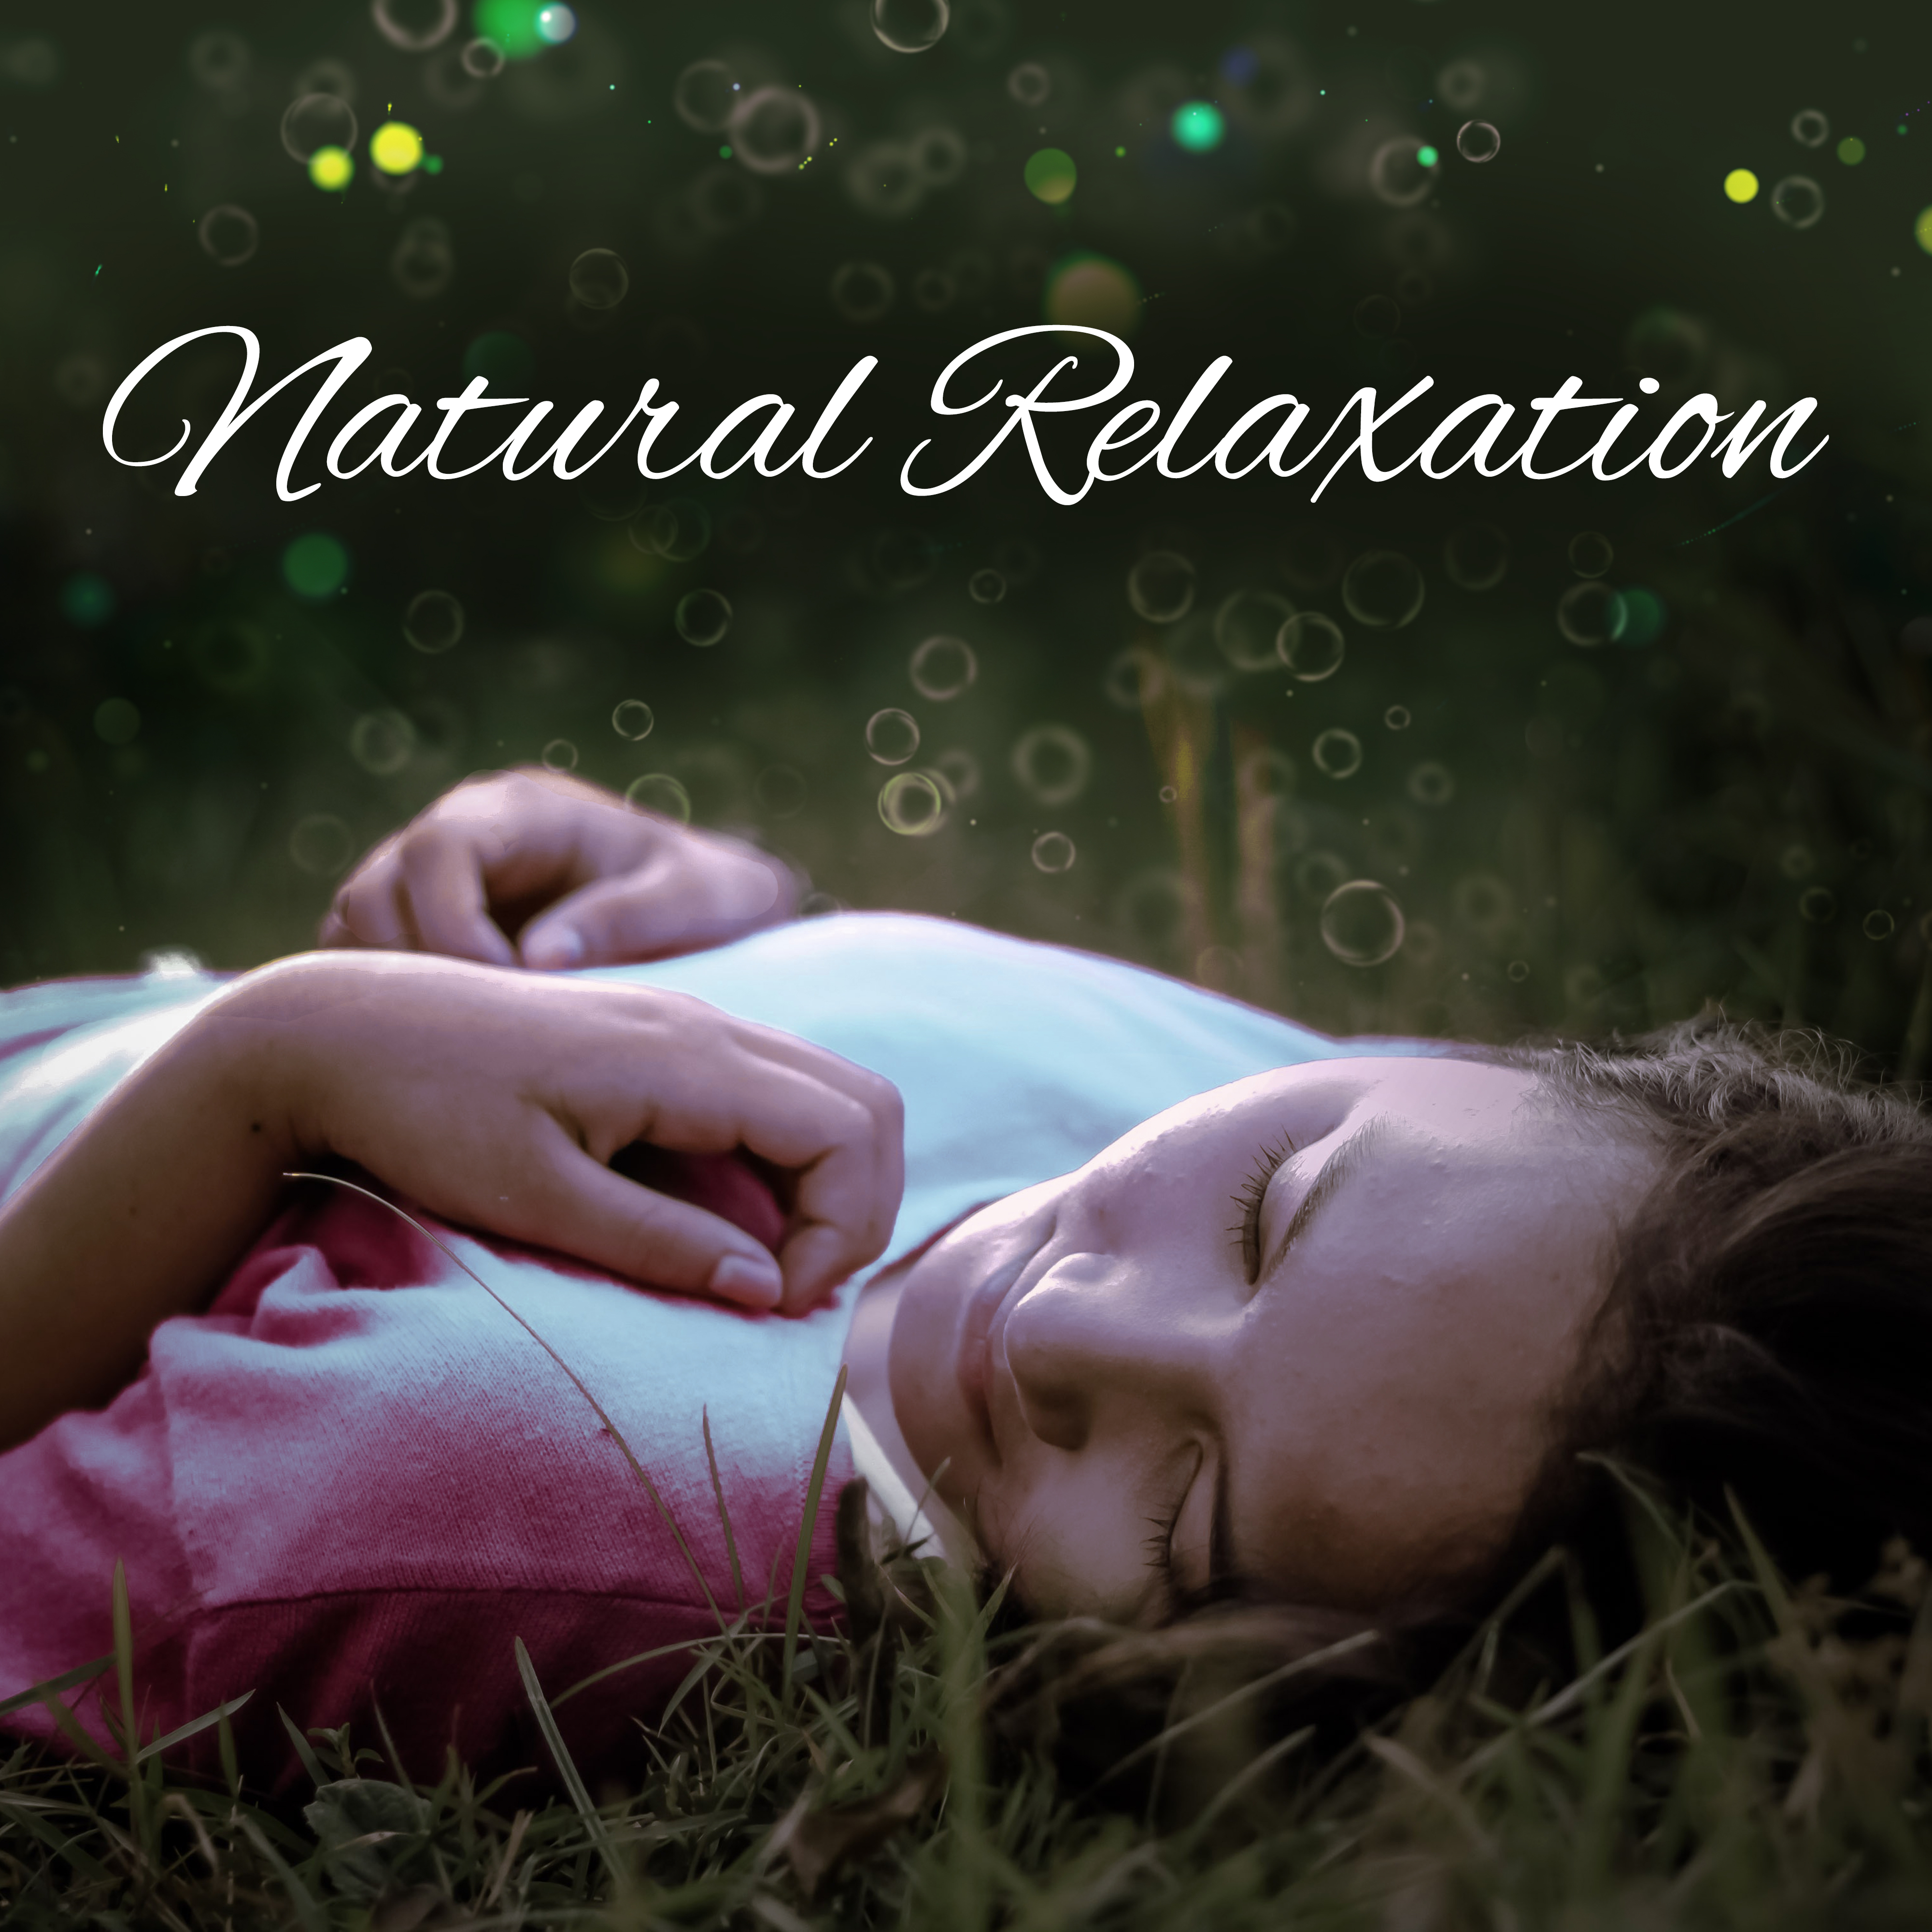 Natural Relaxation – New Age Music, Rest, Relax, Relief Stress, Peaceful Sounds of Nature, Zen